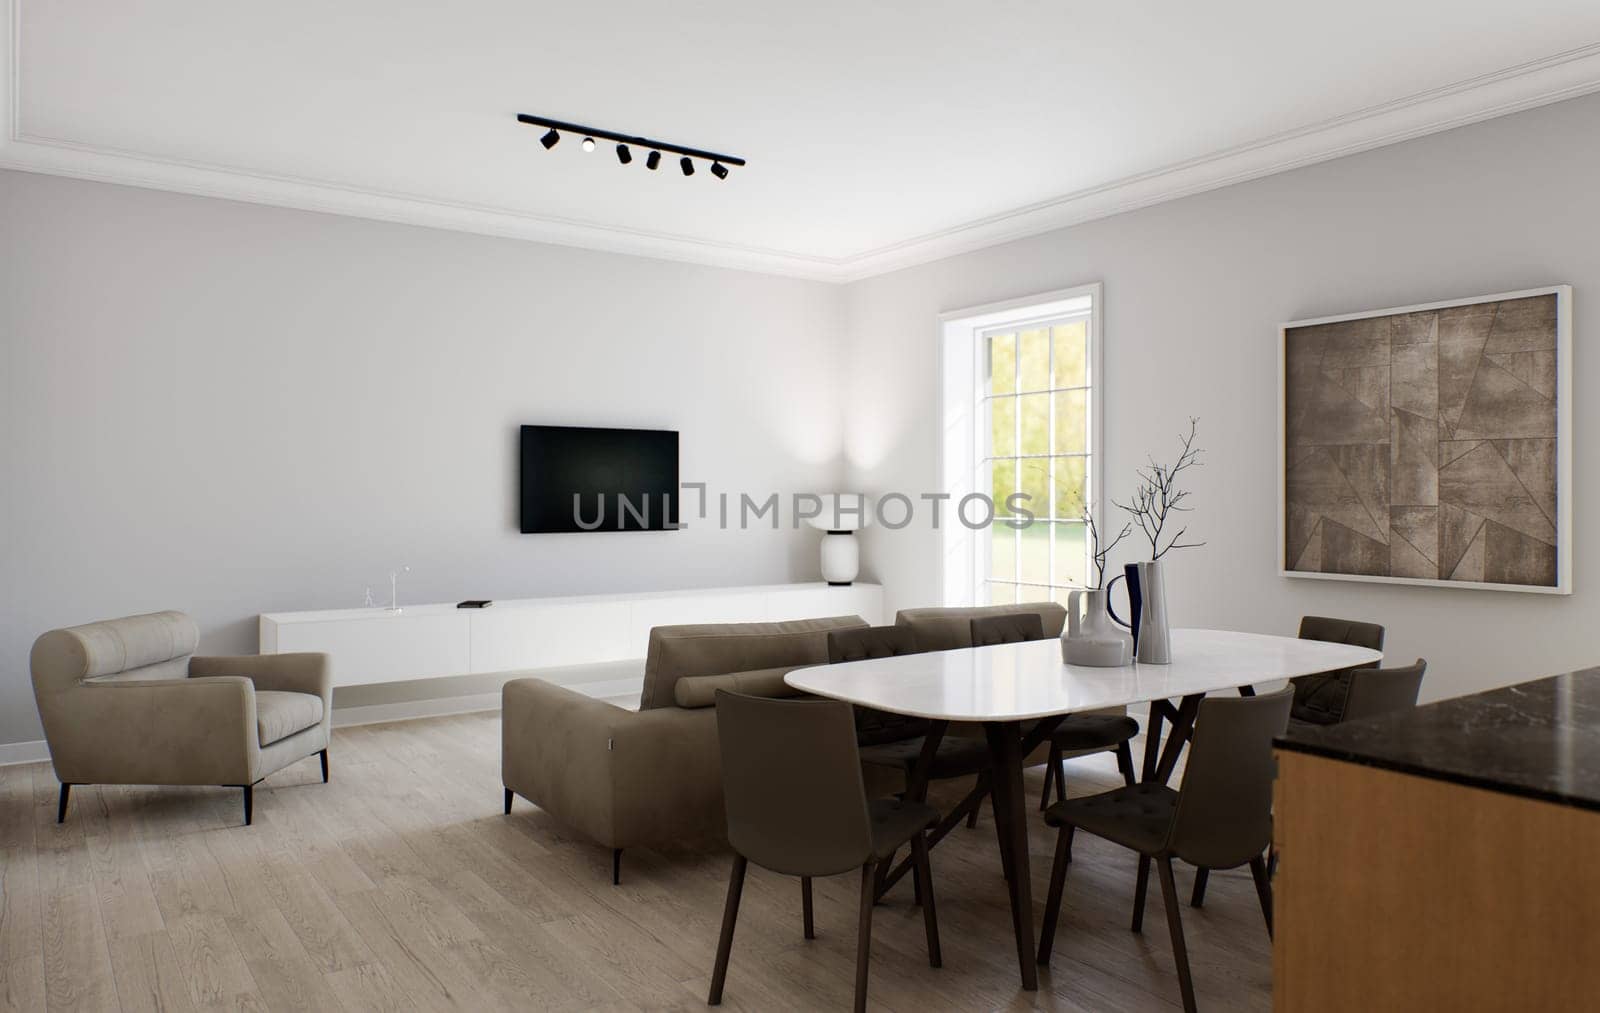 The interior of a light minimalist kitchen-studio. Interior with dining area and seating area with sofa and TV. 3D rendering